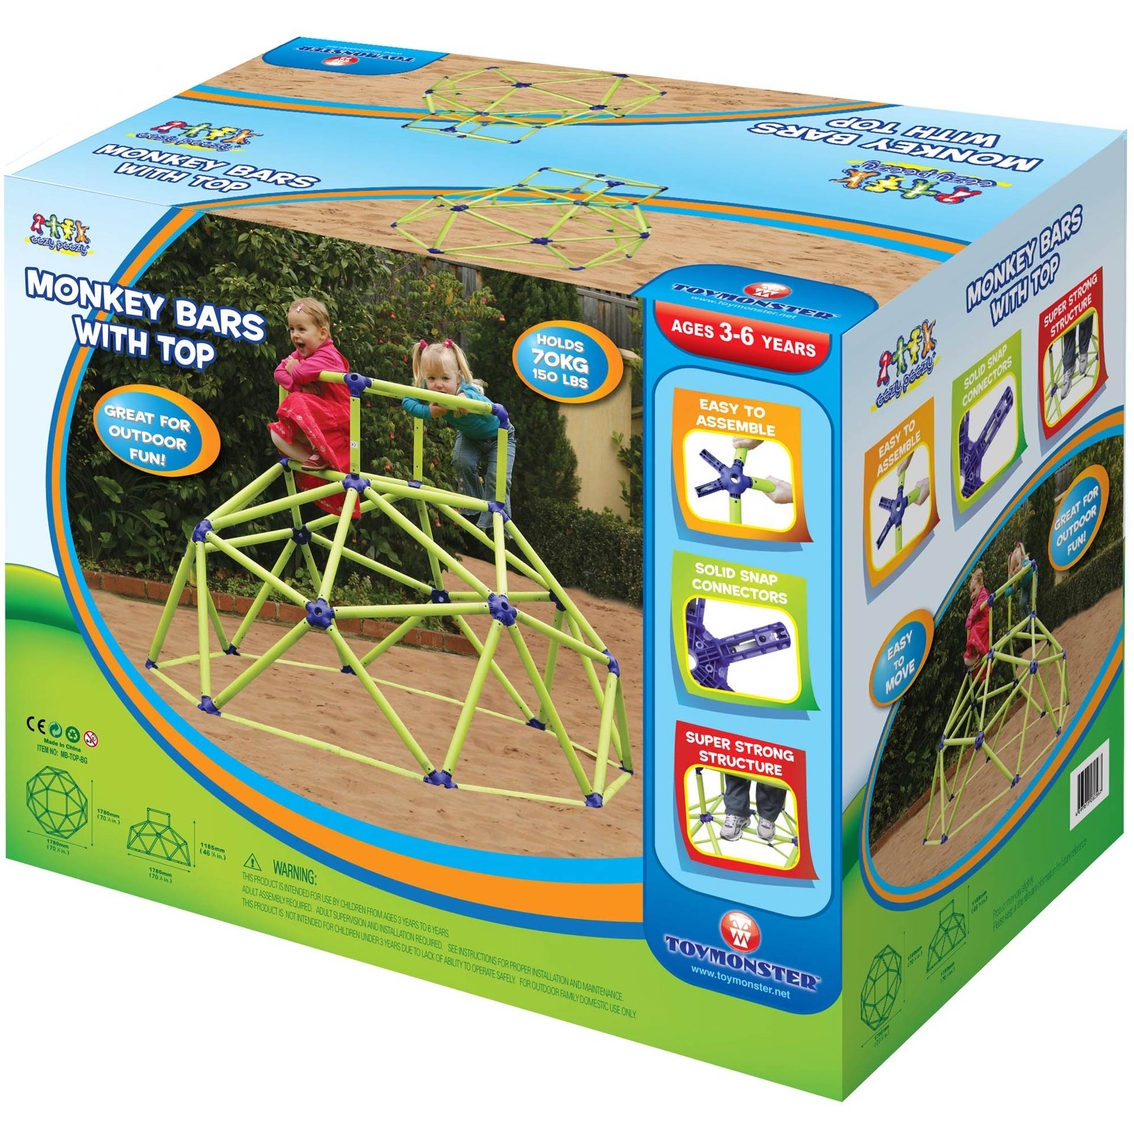 National Sporting Goods Toy Monster Monkey Bars Tower - Image 3 of 3